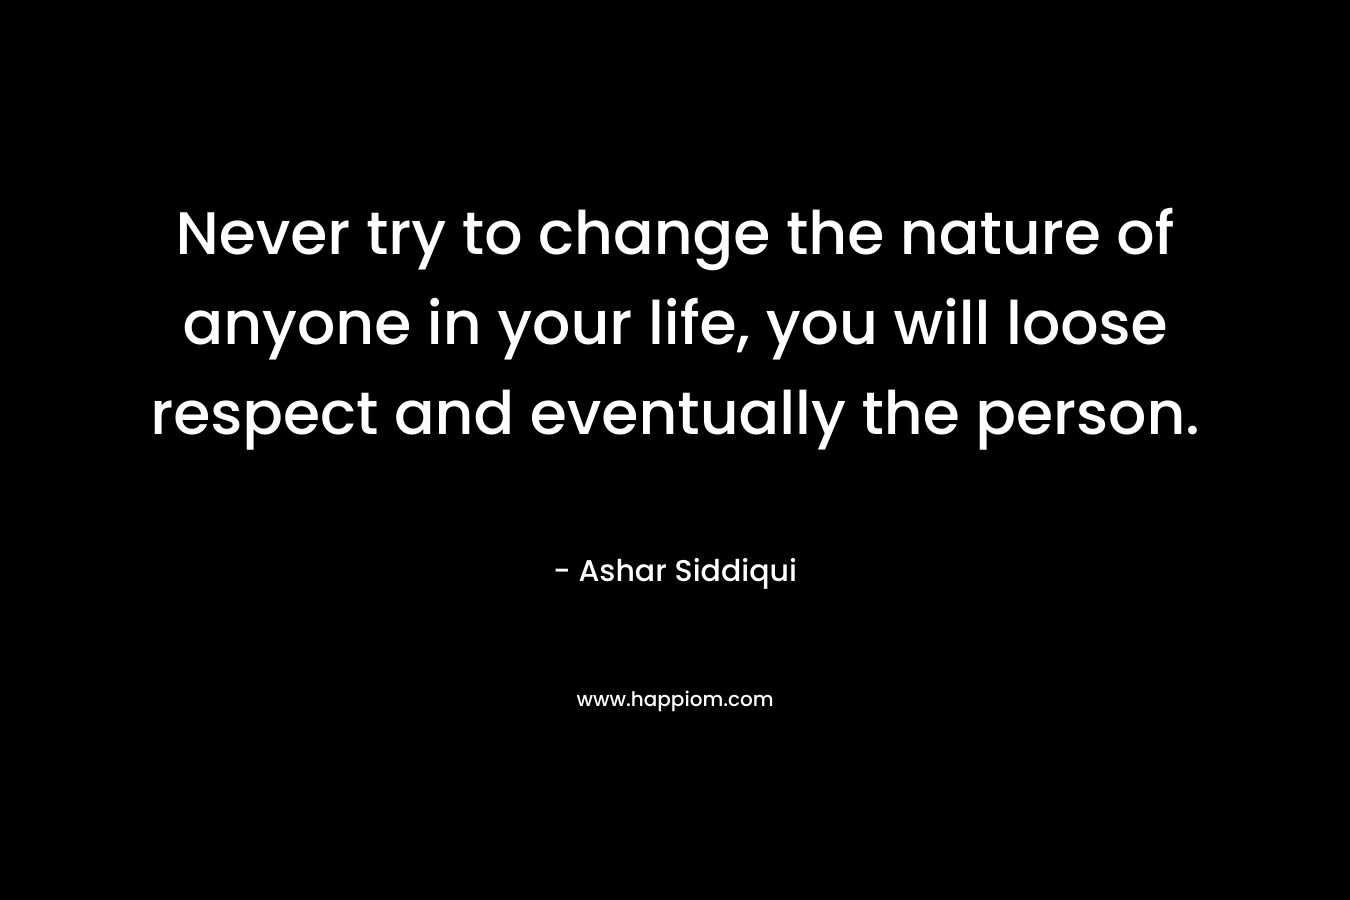 Never try to change the nature of anyone in your life, you will loose respect and eventually the person.